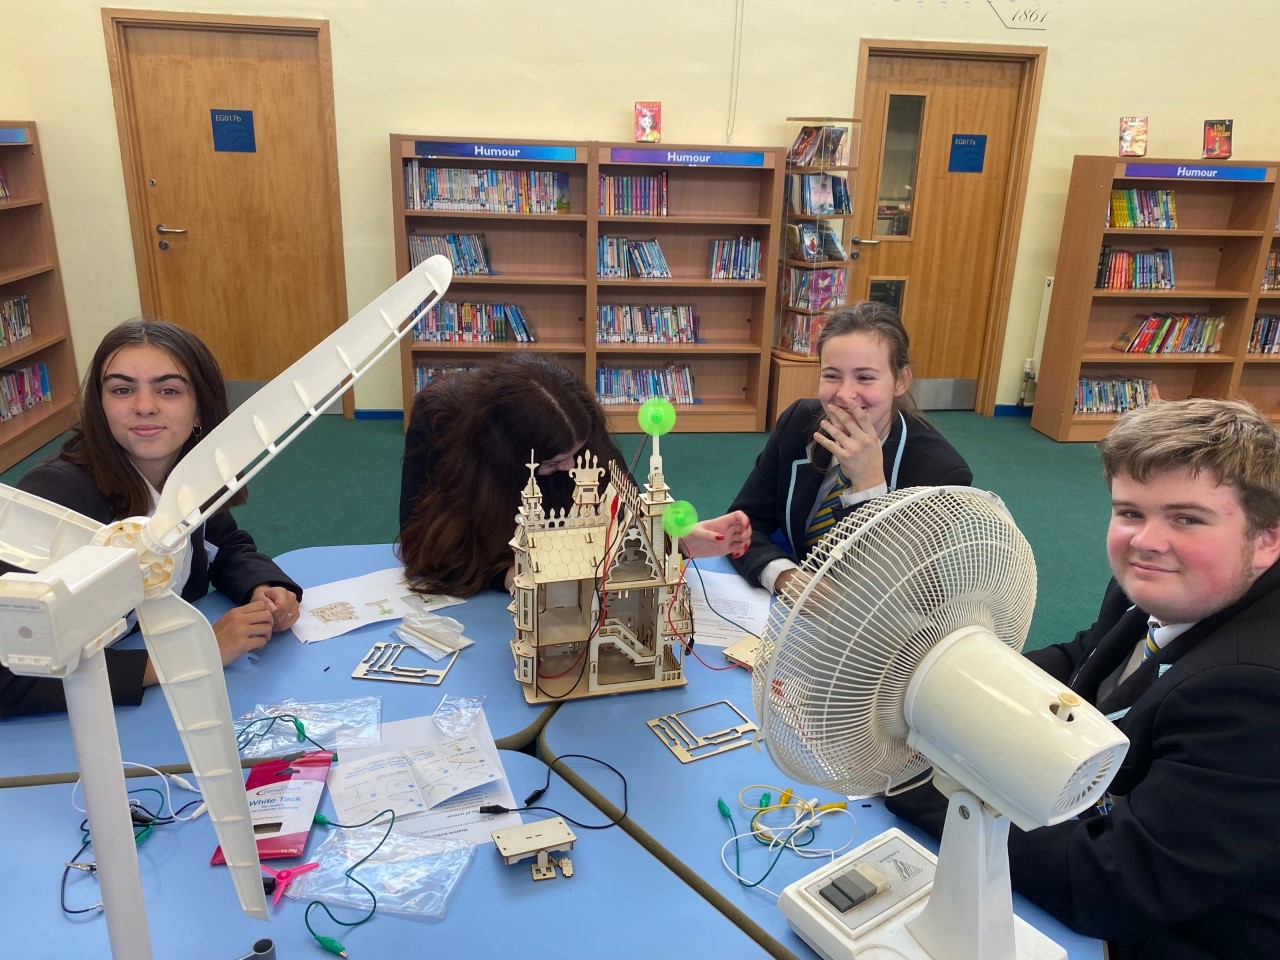 Students at My Smarter Essex: Step Into STEM building their own wind turbines